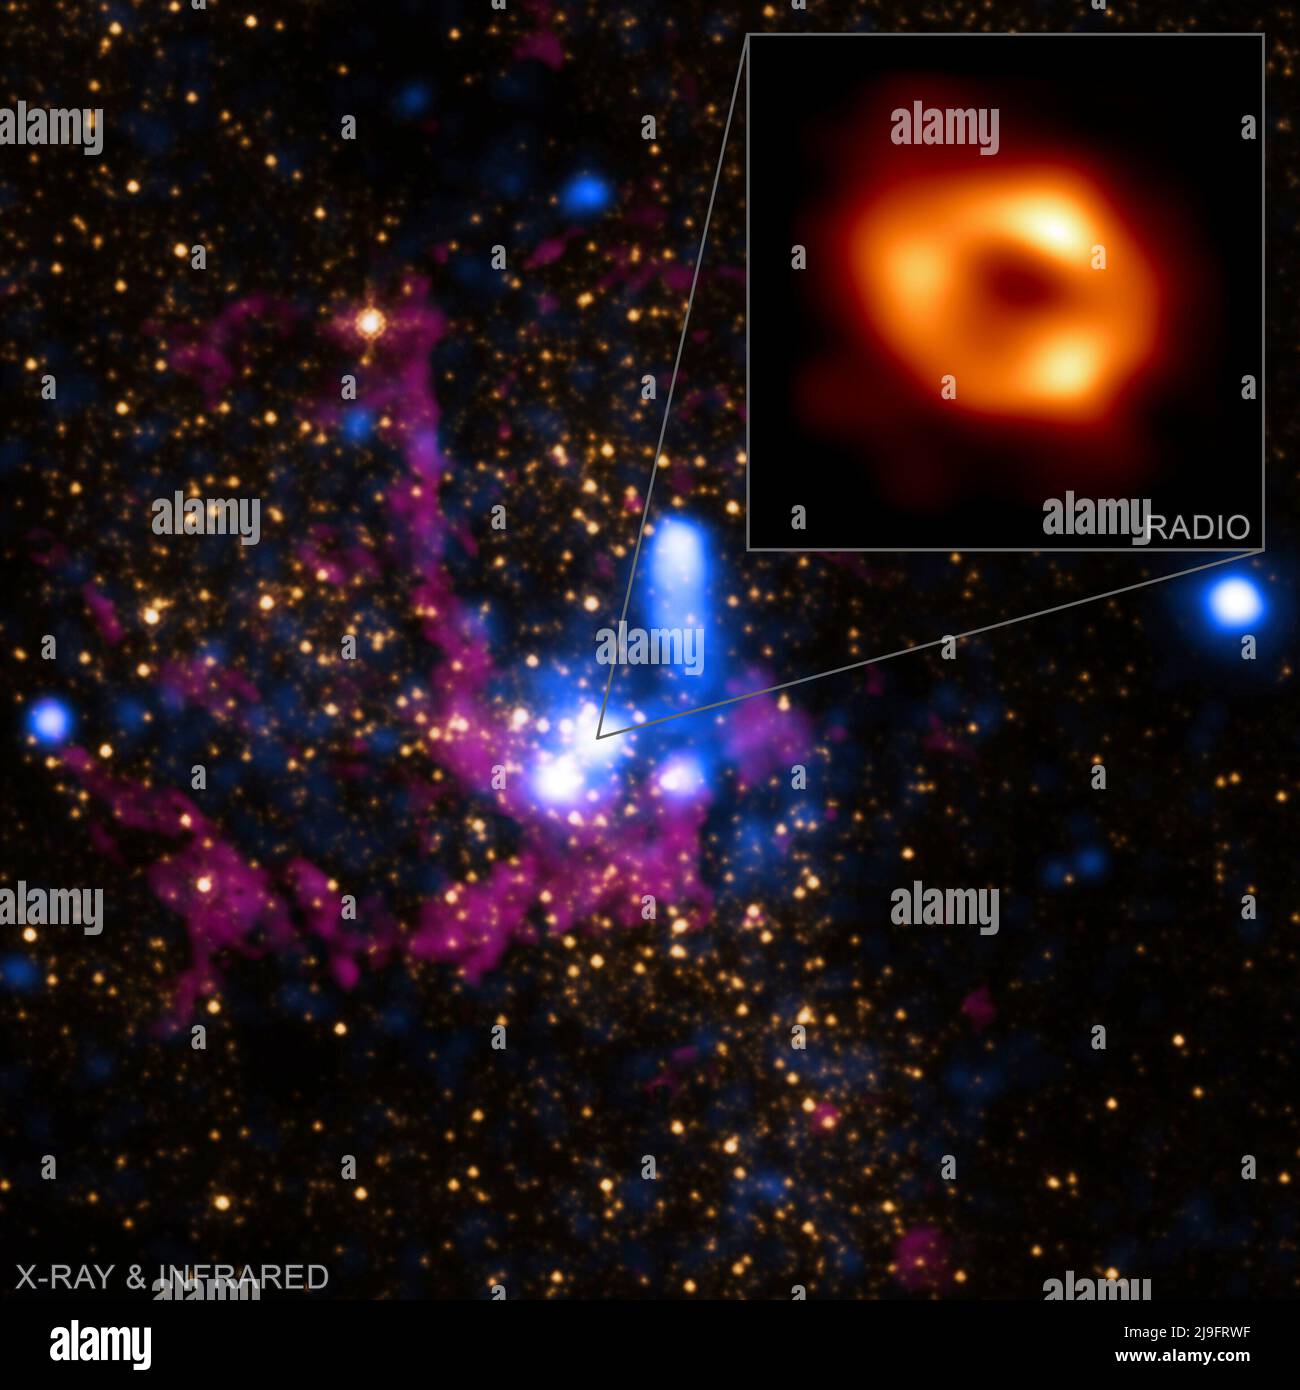 Three NASA telescopes, help astronomers learn more about the Milky Way's supermassive black hole, captured in the latest remarkable image from the Event Horizon Telescope (EHT). The Chandra X-ray Observatory, Nuclear Spectroscopic Telescope Array (NuSTAR), and the Neil Gehrels Swift Observatory (Swift) all observe X-rays from their positions in Earth orbit. X-rays pass through much of the gas and dust that blocks the optical view of the center of the Galaxy some 27,000 light years from Earth. The new EHT image of the Milky Way's central black hole  known as Sagittarius A* (abbreviated as Sgr Stock Photo